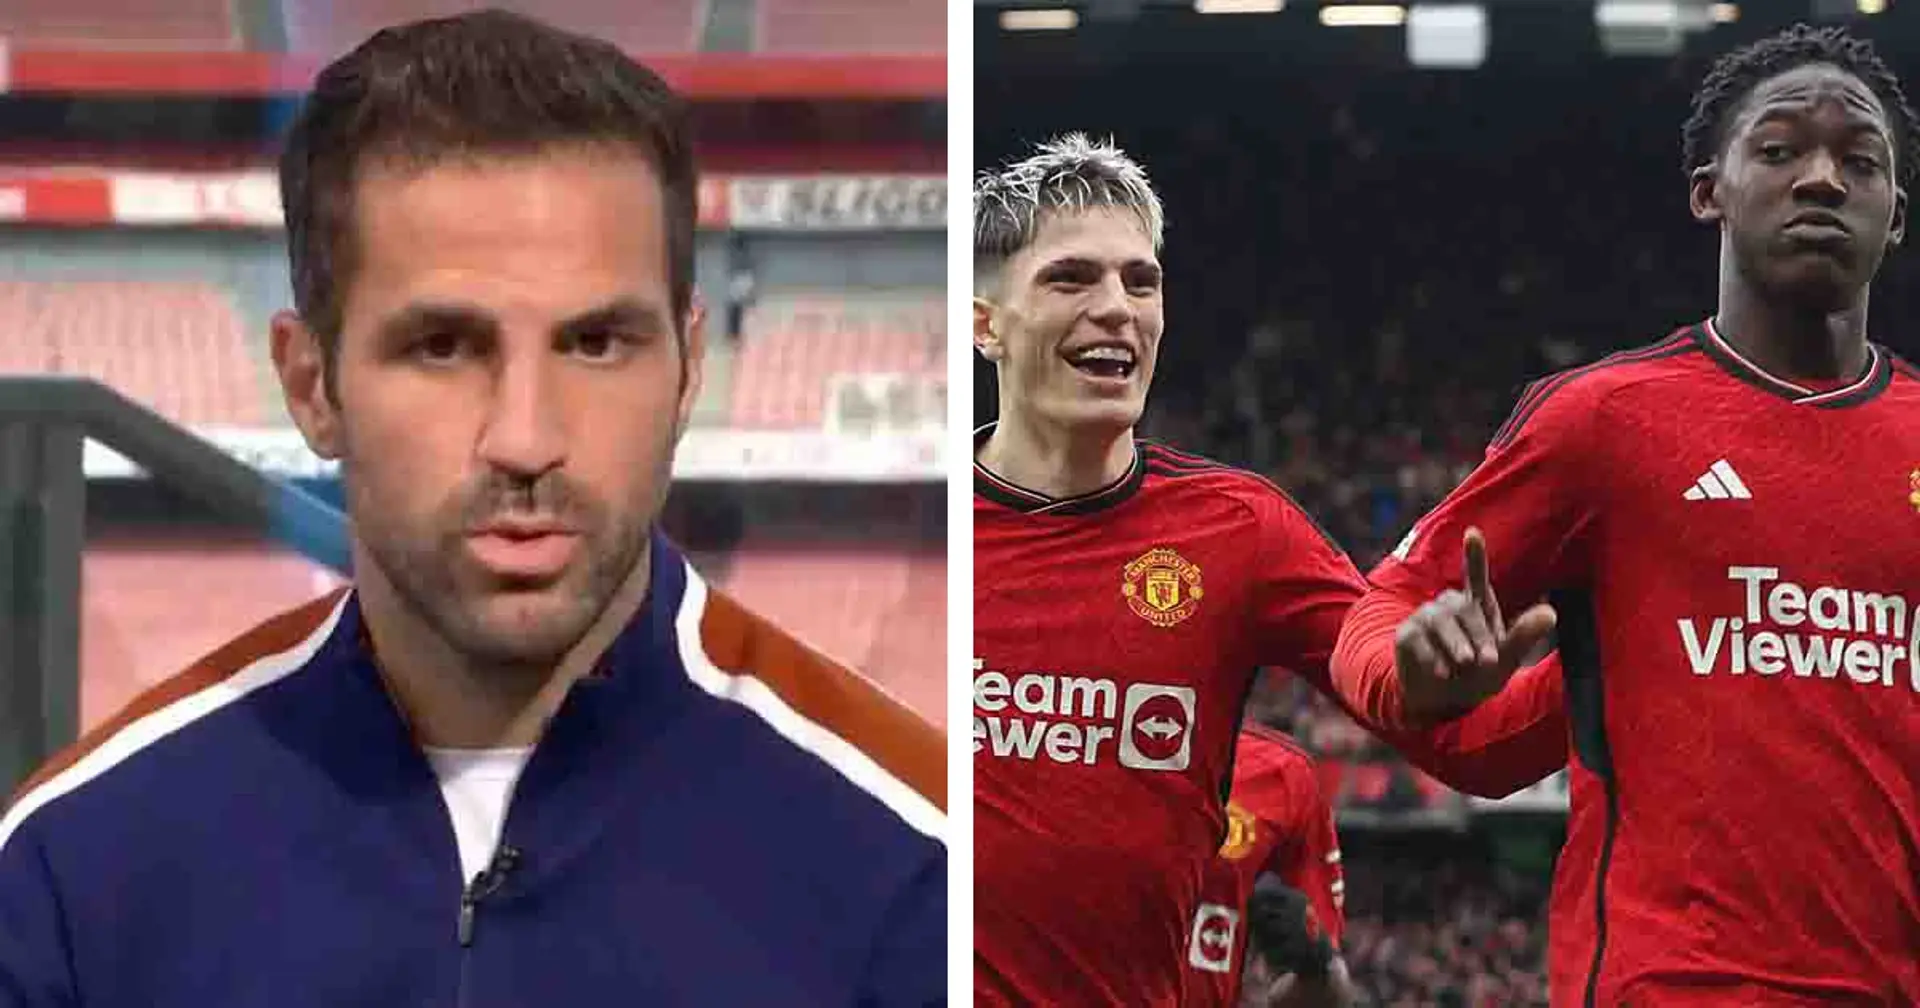 'He can make a real difference': Cesc Fabregas urges Man United to build around one player